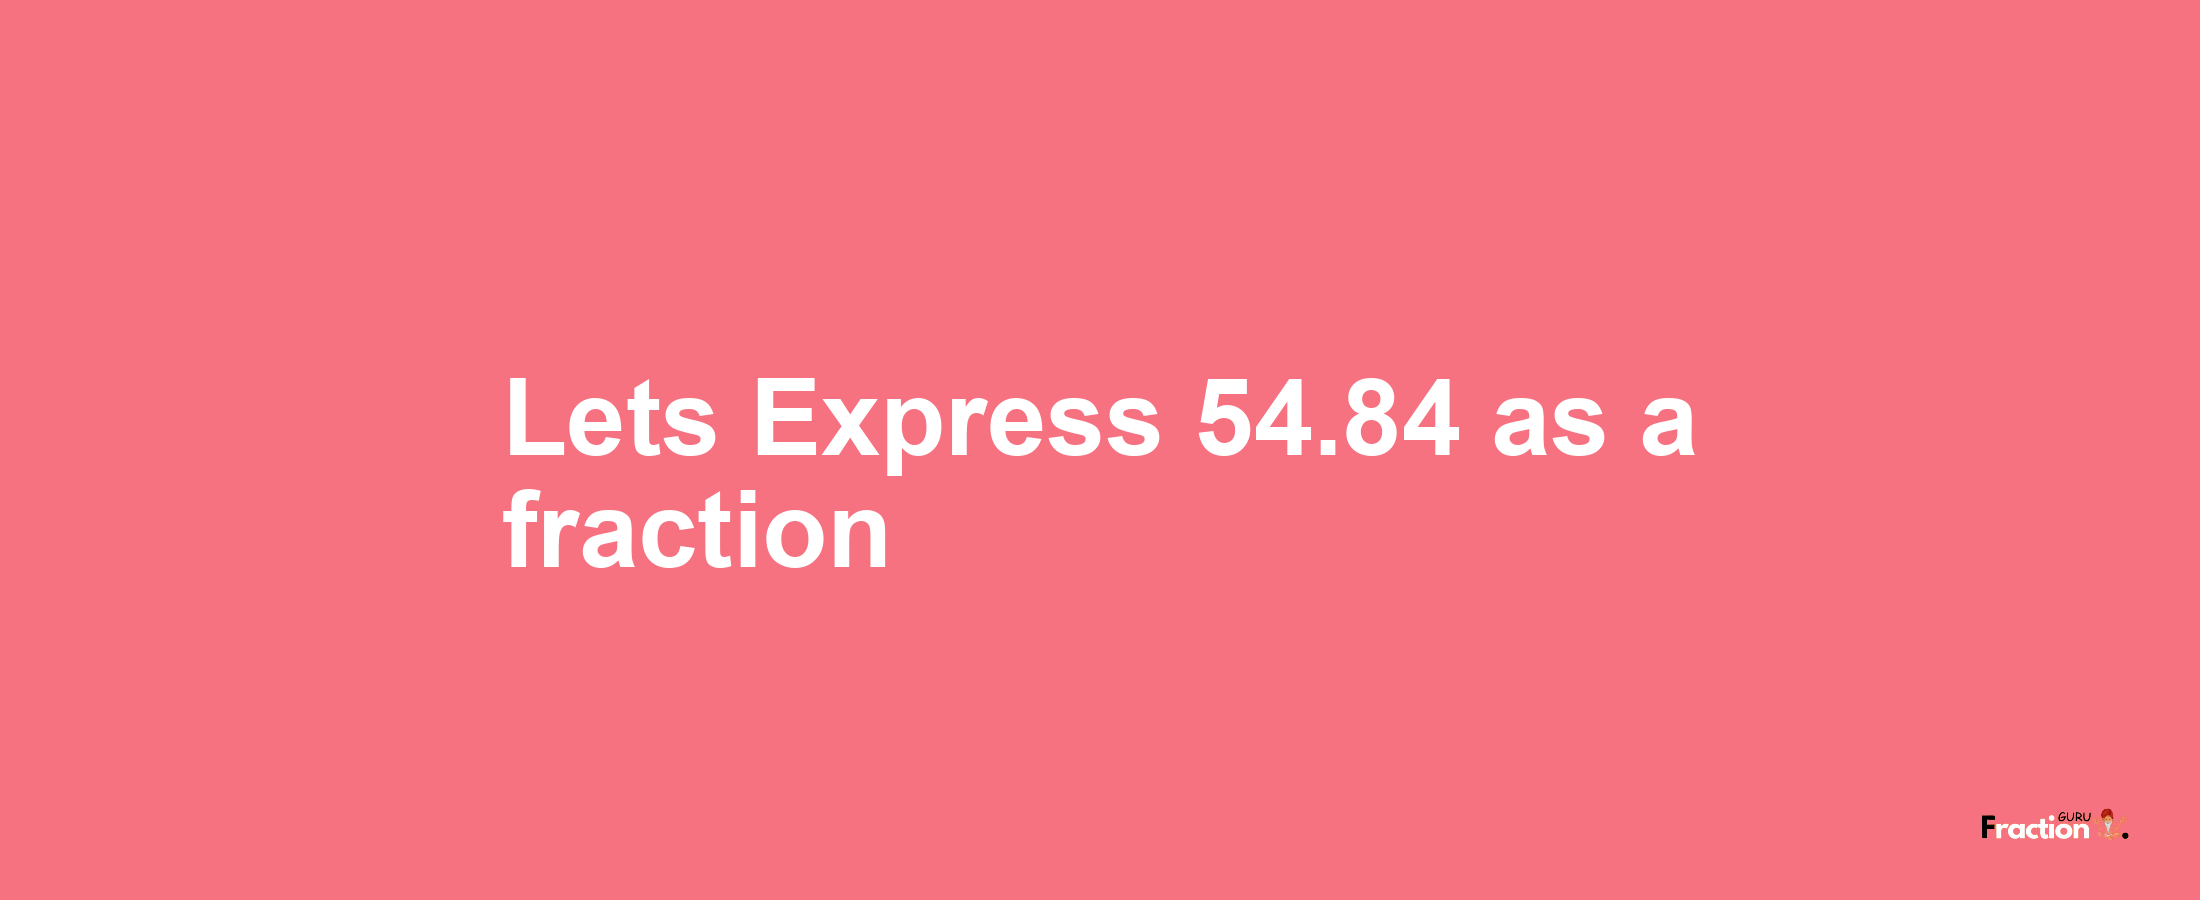 Lets Express 54.84 as afraction